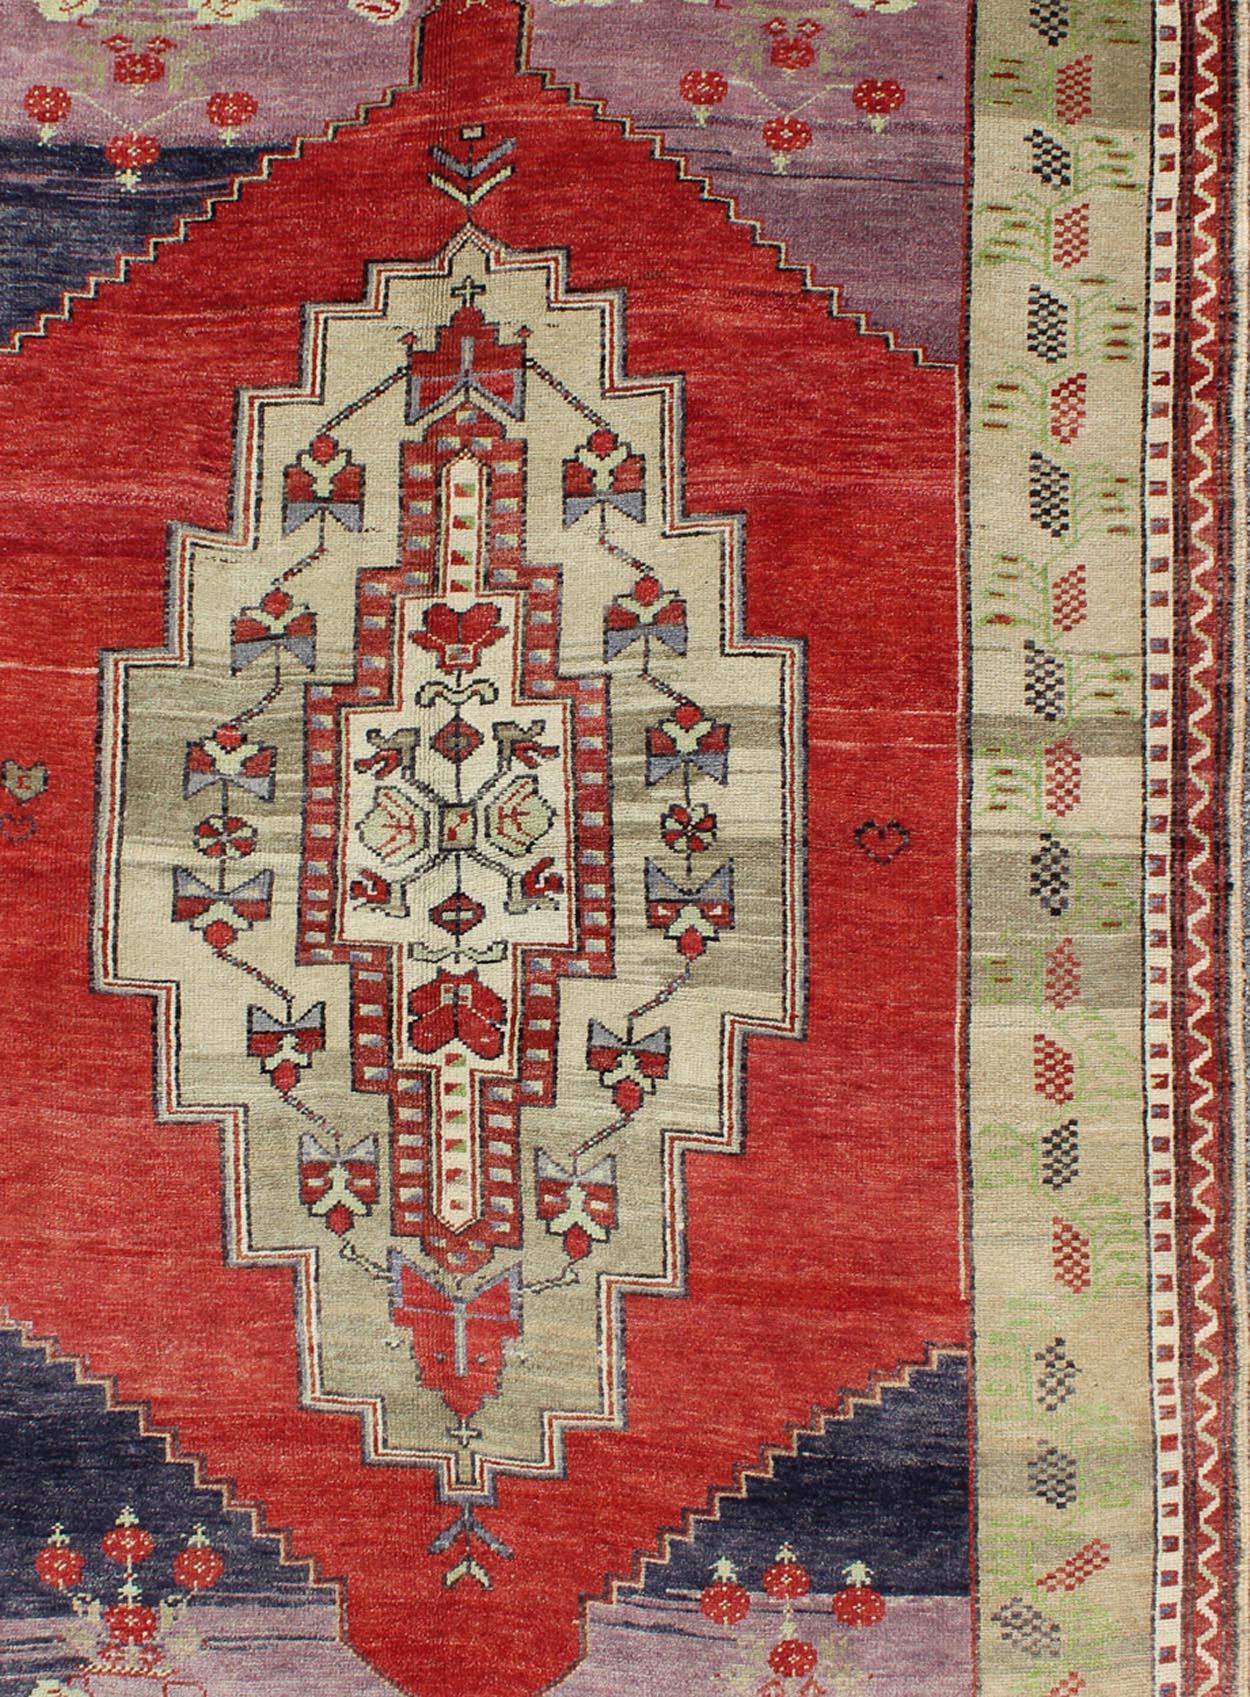 This beautiful rug from mid-20th century Turkey features a classic Oushak design, large scale medallion in the field, rendered in red, champagne, and taupe. Each corner of the field is corniced with floral motifs atop lilac and dark blue. The